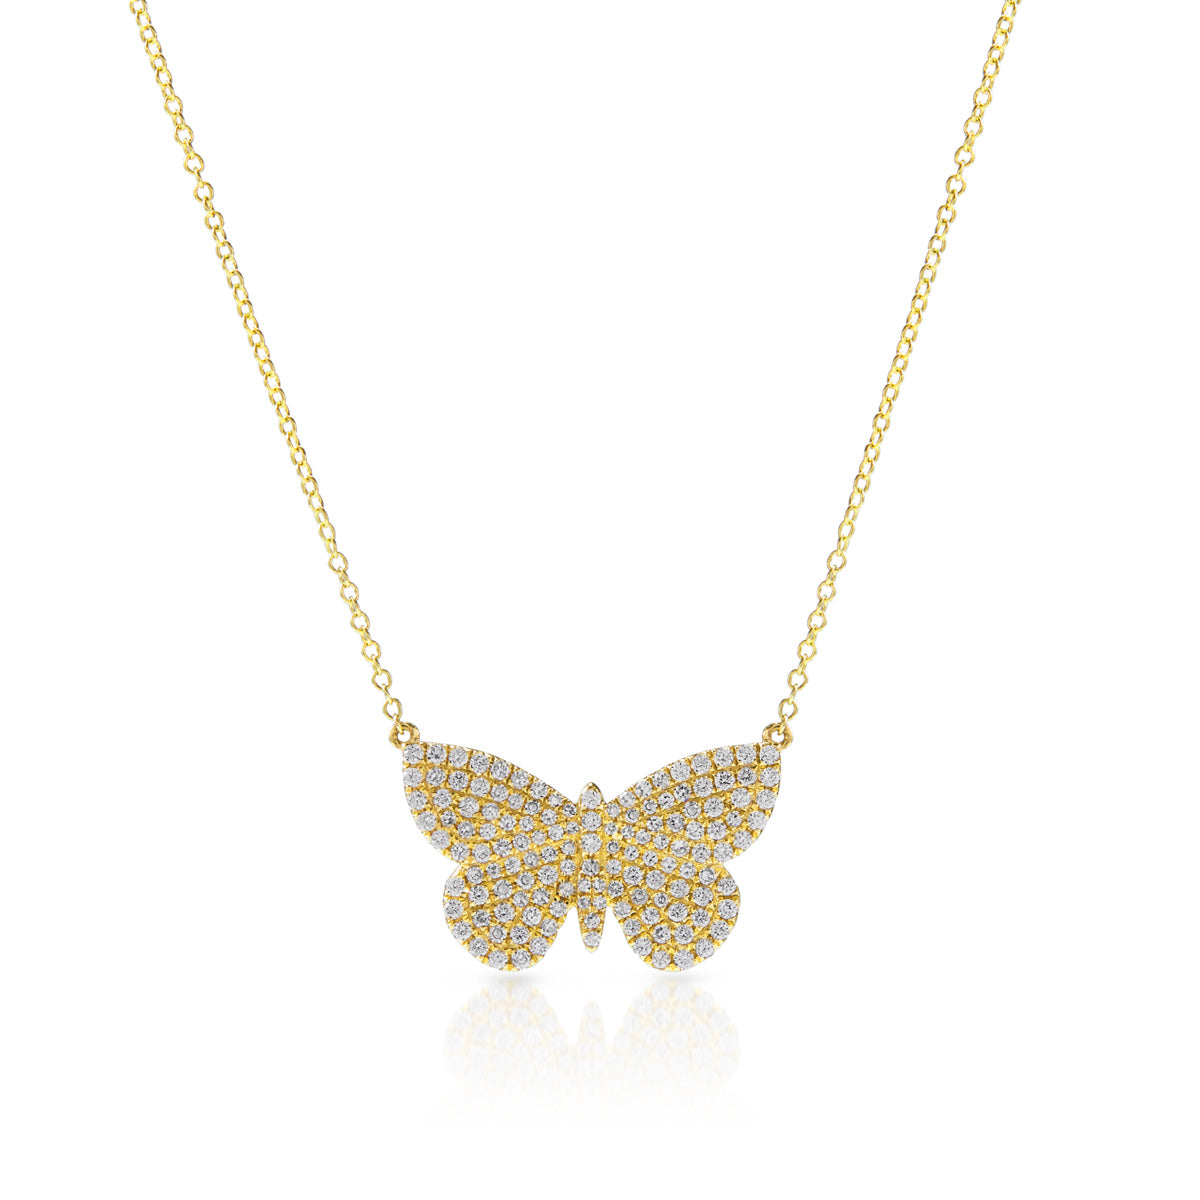 14KT Yellow Gold Luxe Pave Diamond Butterfly Necklace - Anne Sisteron